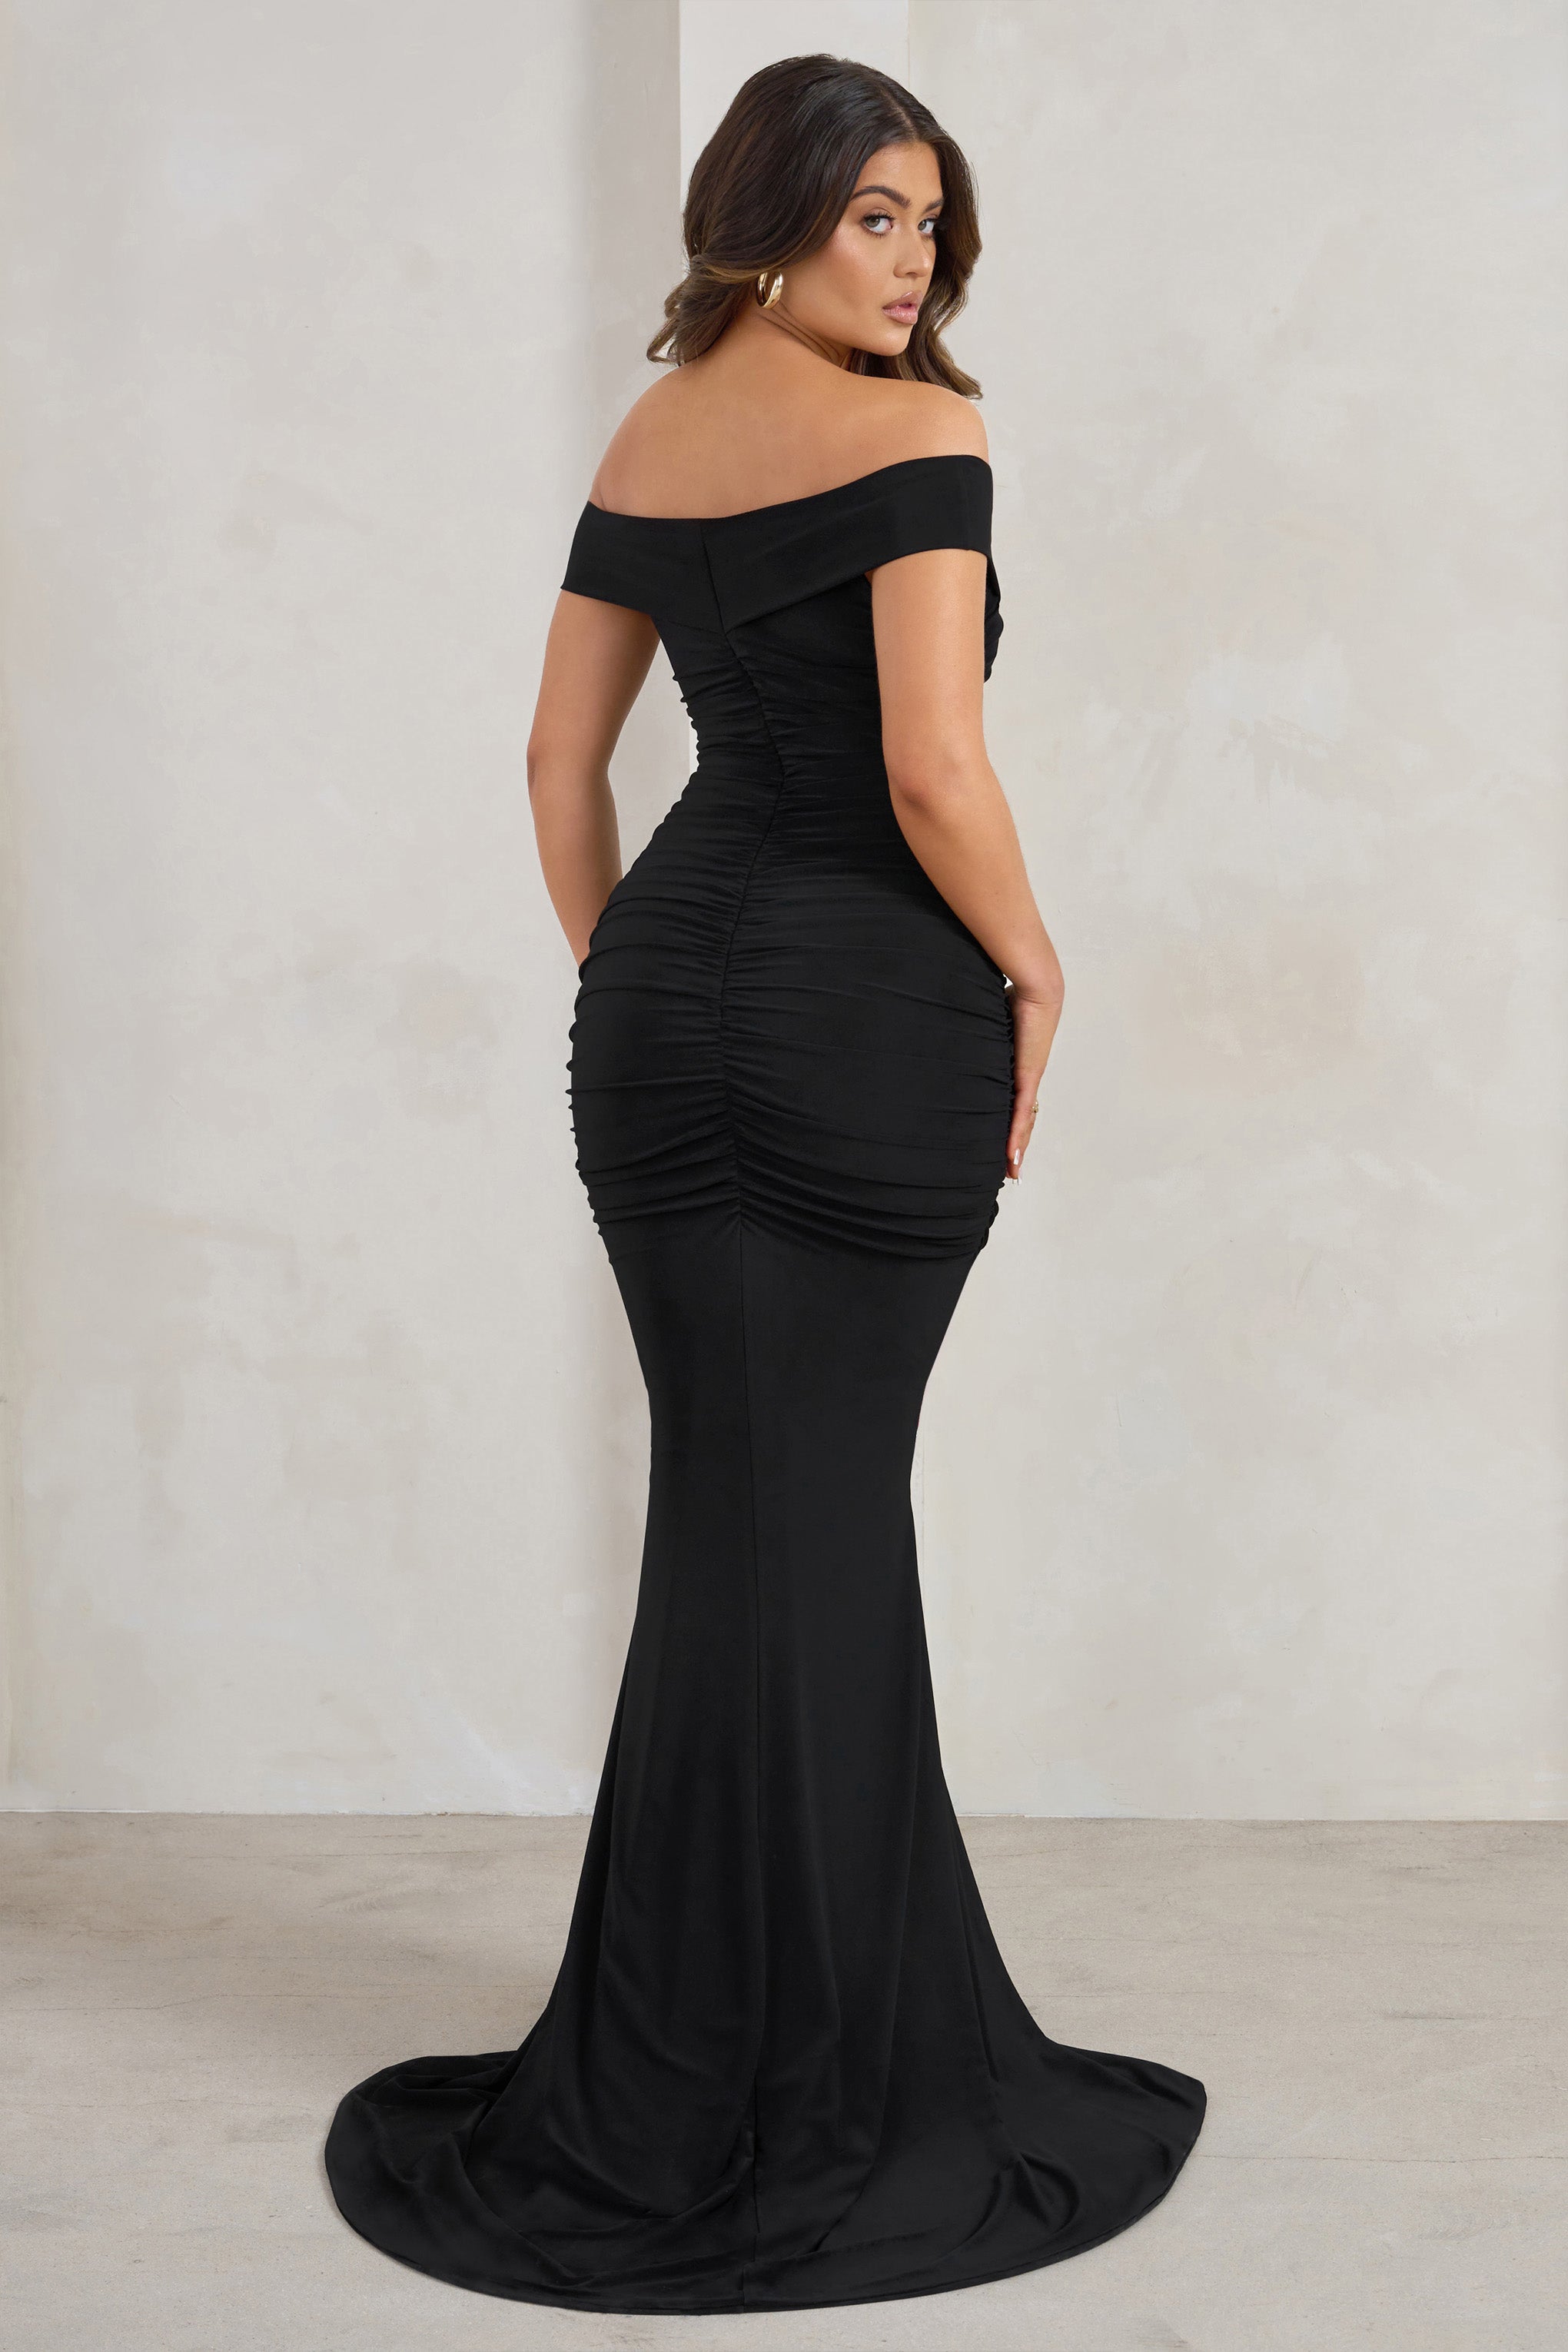 Apolline Black Off The Shoulder Ruched Fishtail Maxi Dress